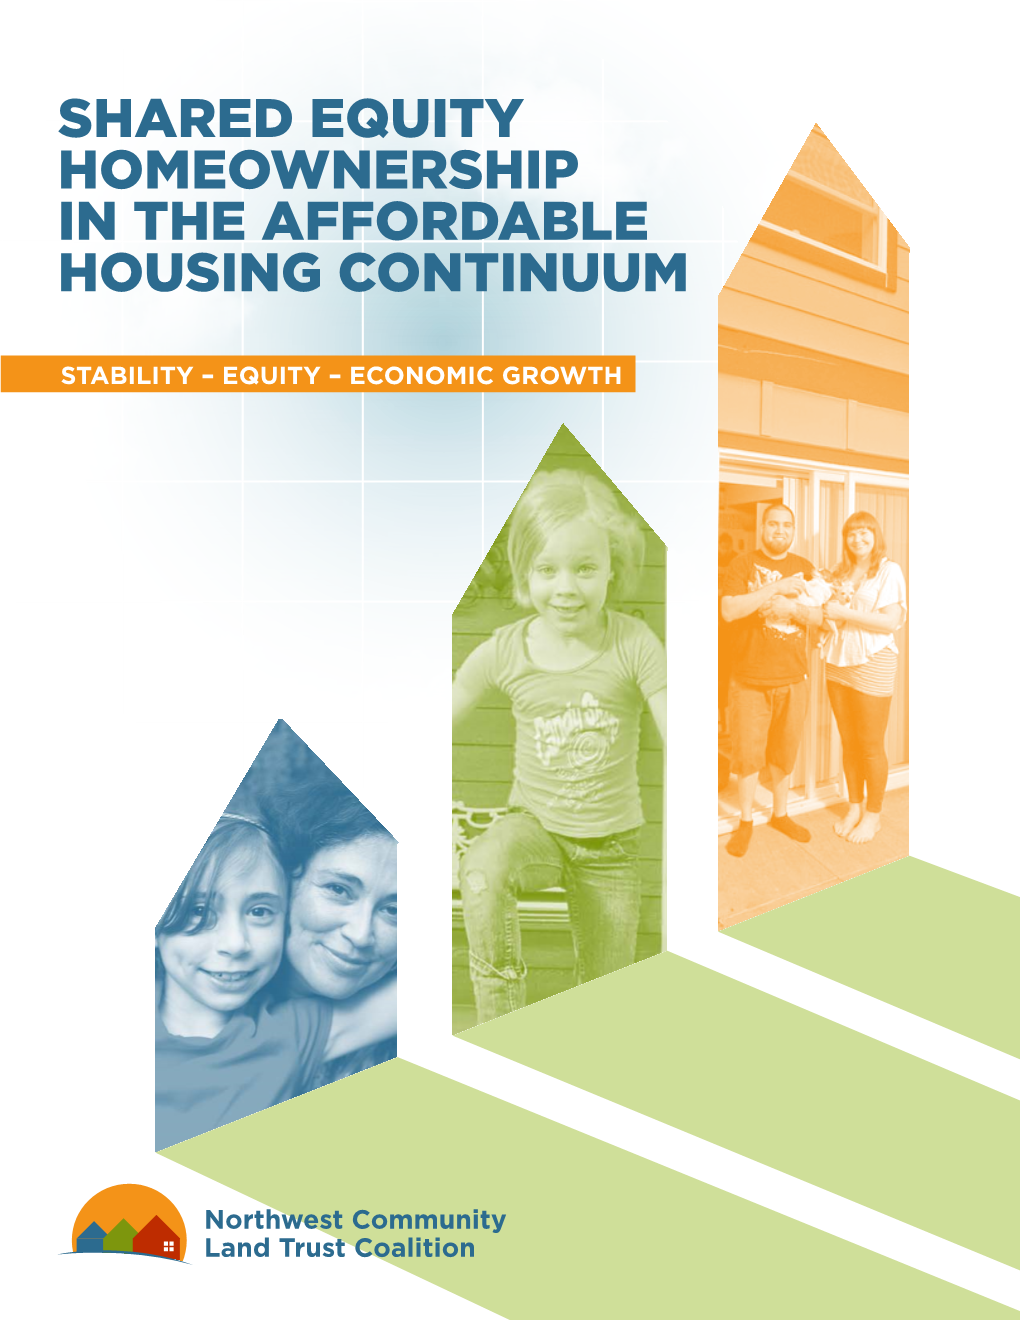 Northwest Community Land Trust “SHARED EQUITY HOMEOWNERSHIP in the AFFORDABLE HOUSING CONTINUUM”